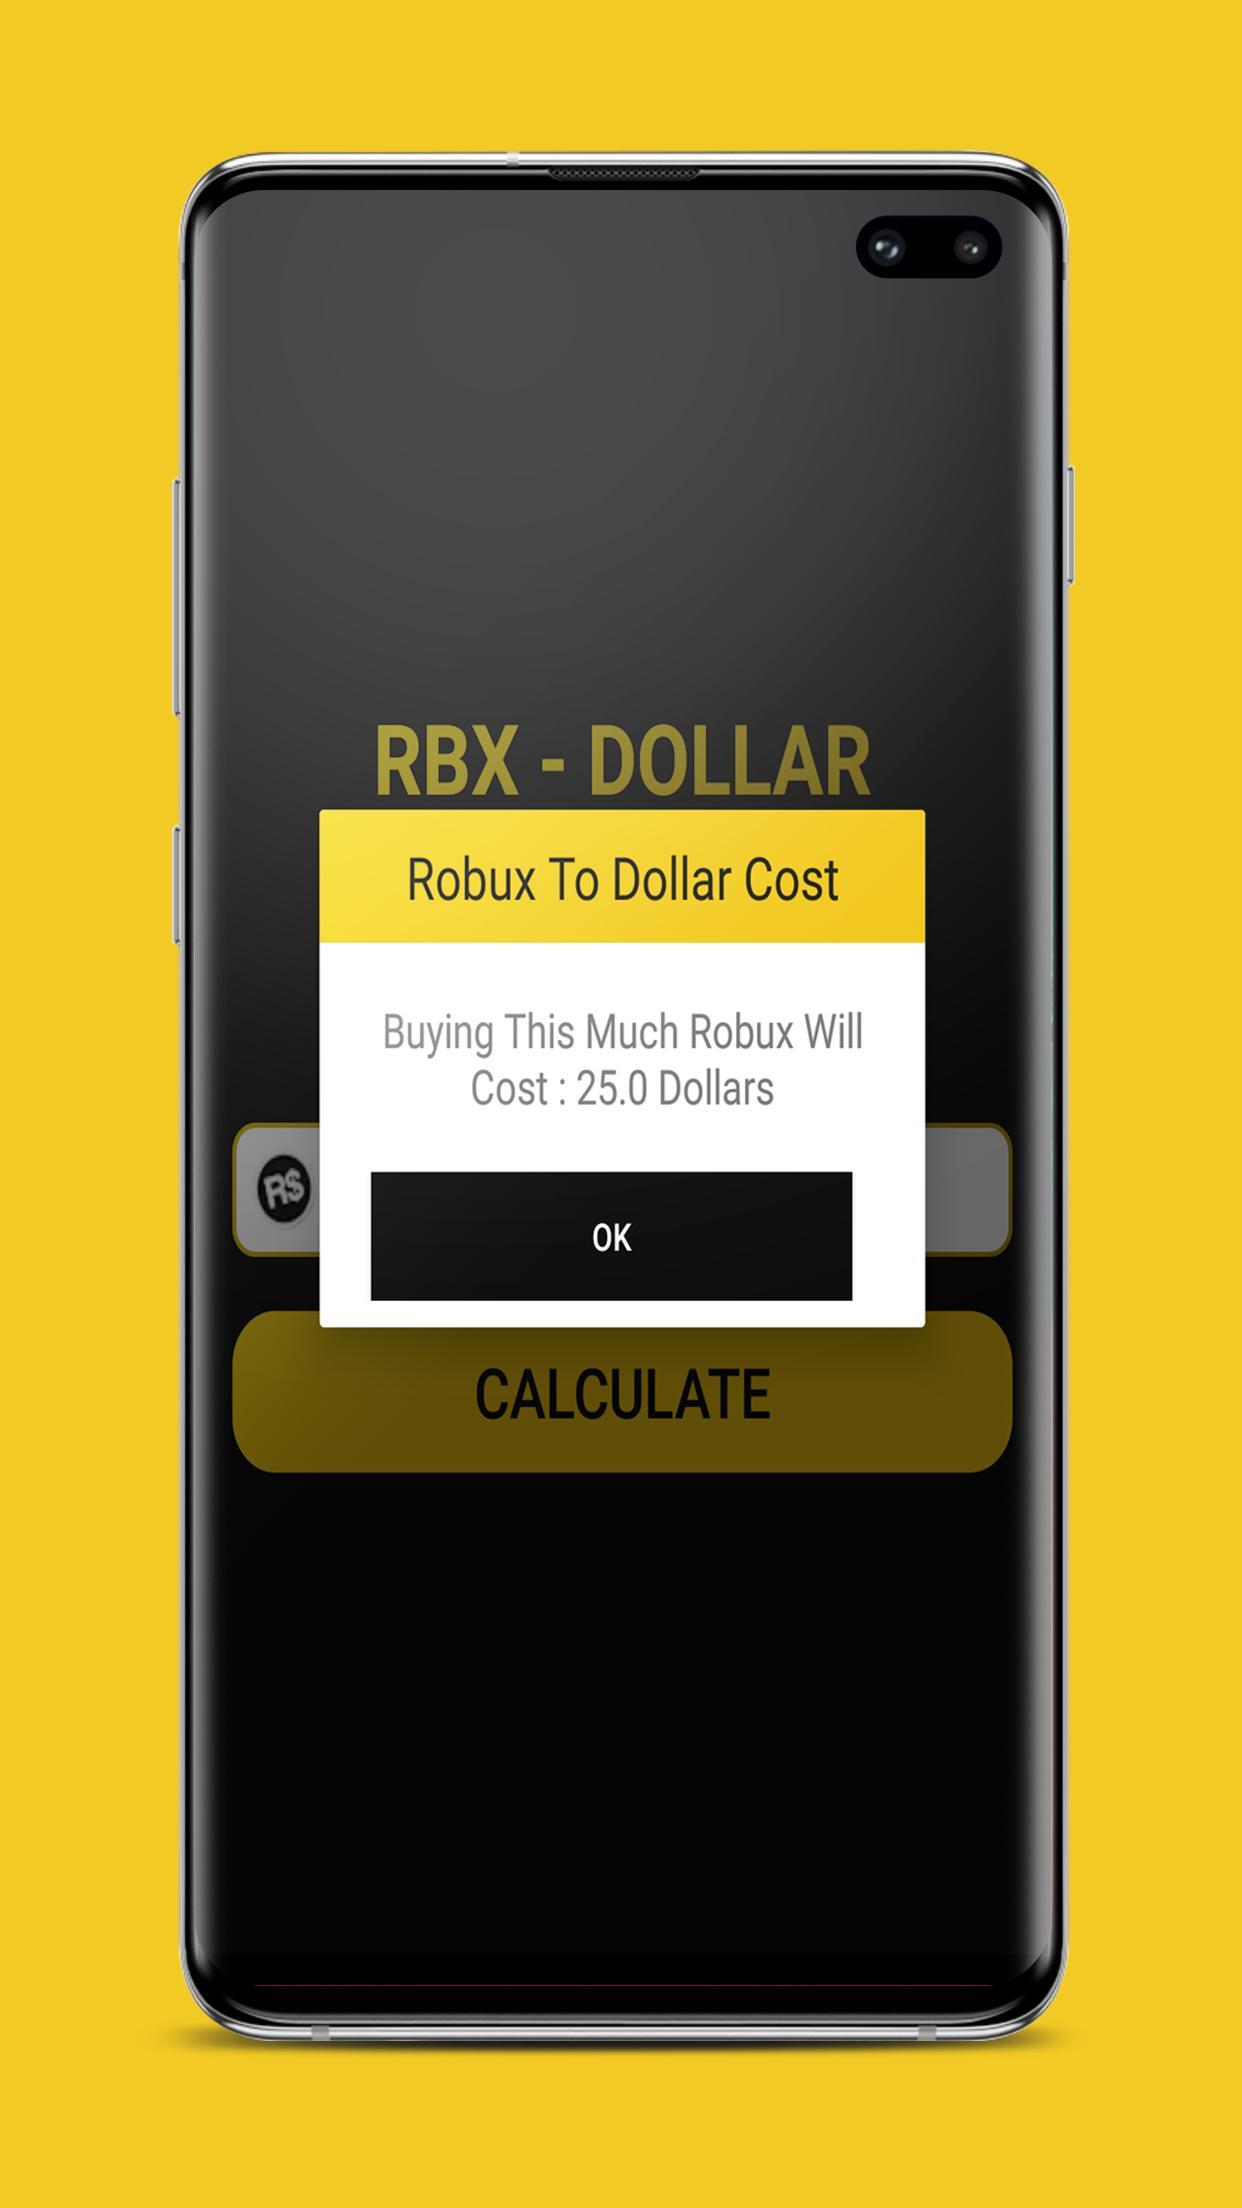 Buying Robux From Rbx Place Roblox Unblocked Roblox Free Robux Codes 2019 August Calendar - reward rbx place